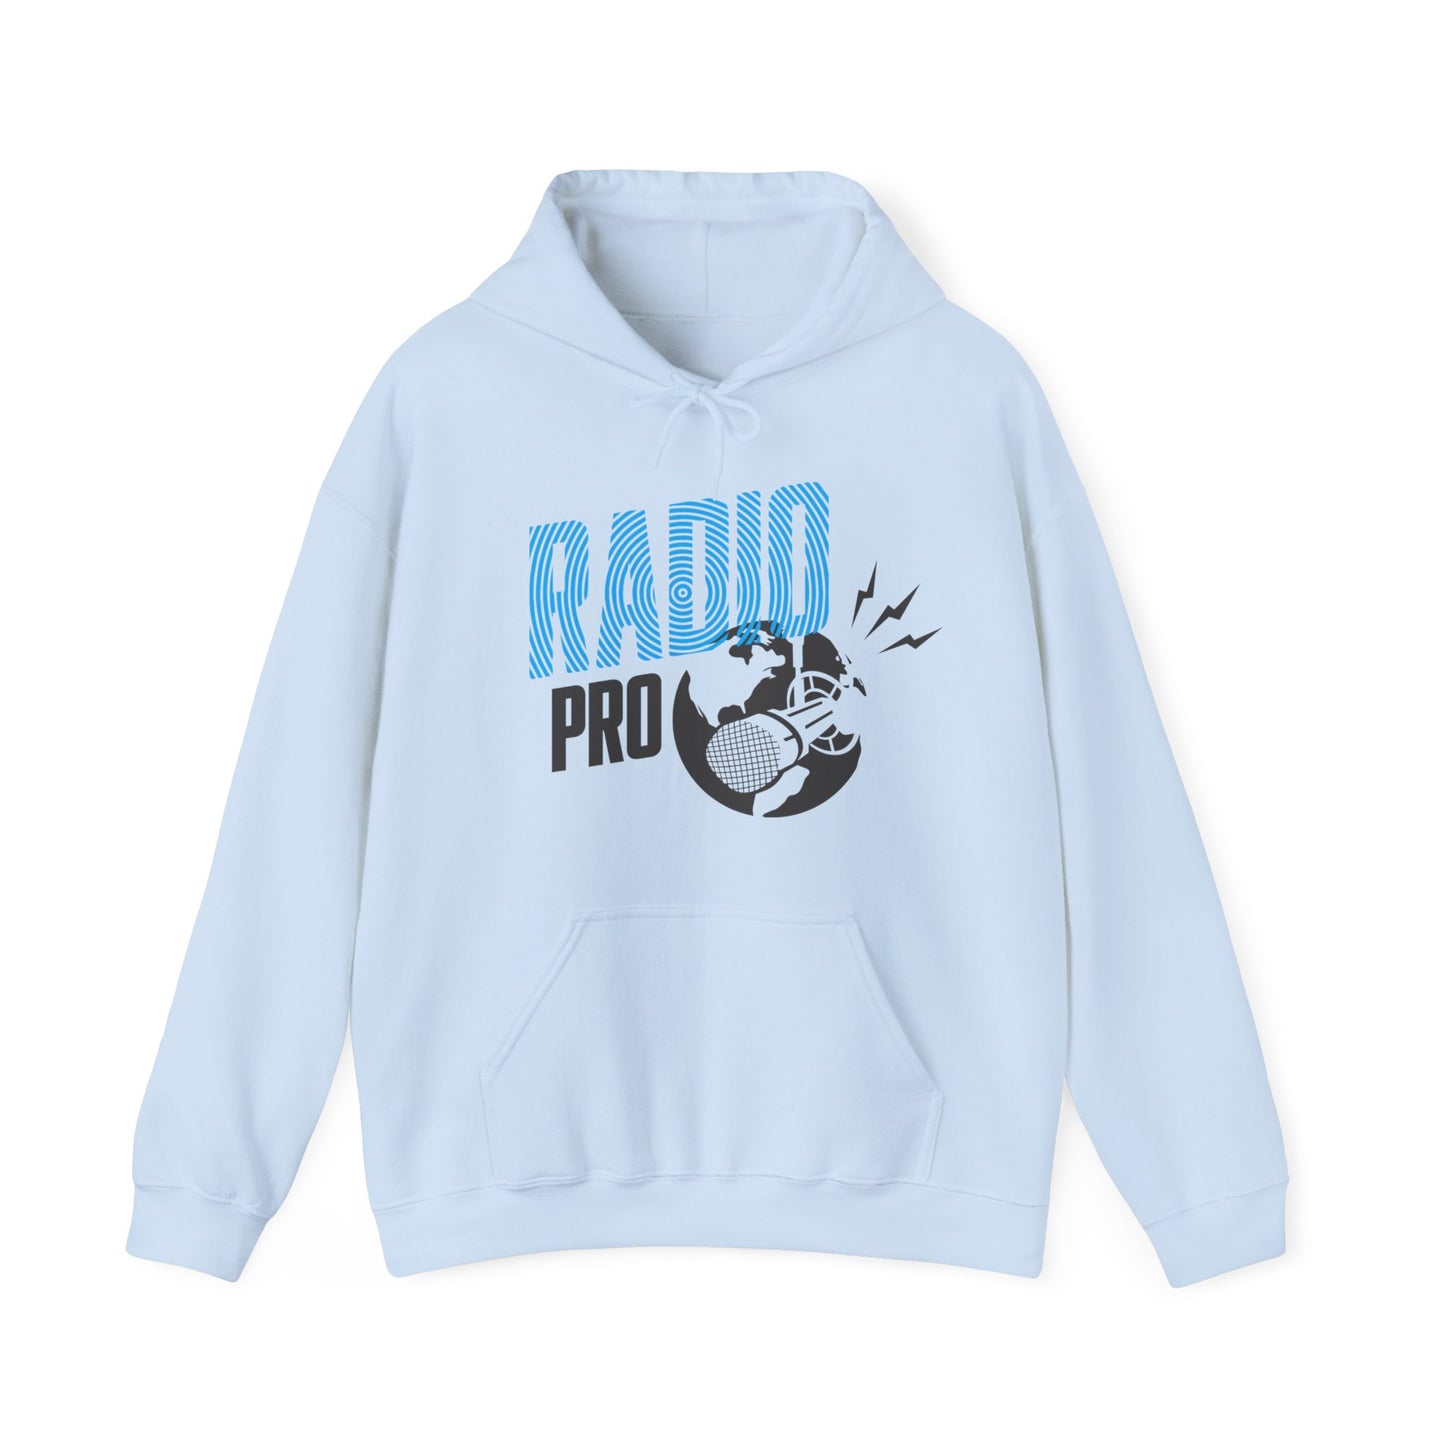 Copy of Radio T-Shirt for Radio DJs and Music Industry pros